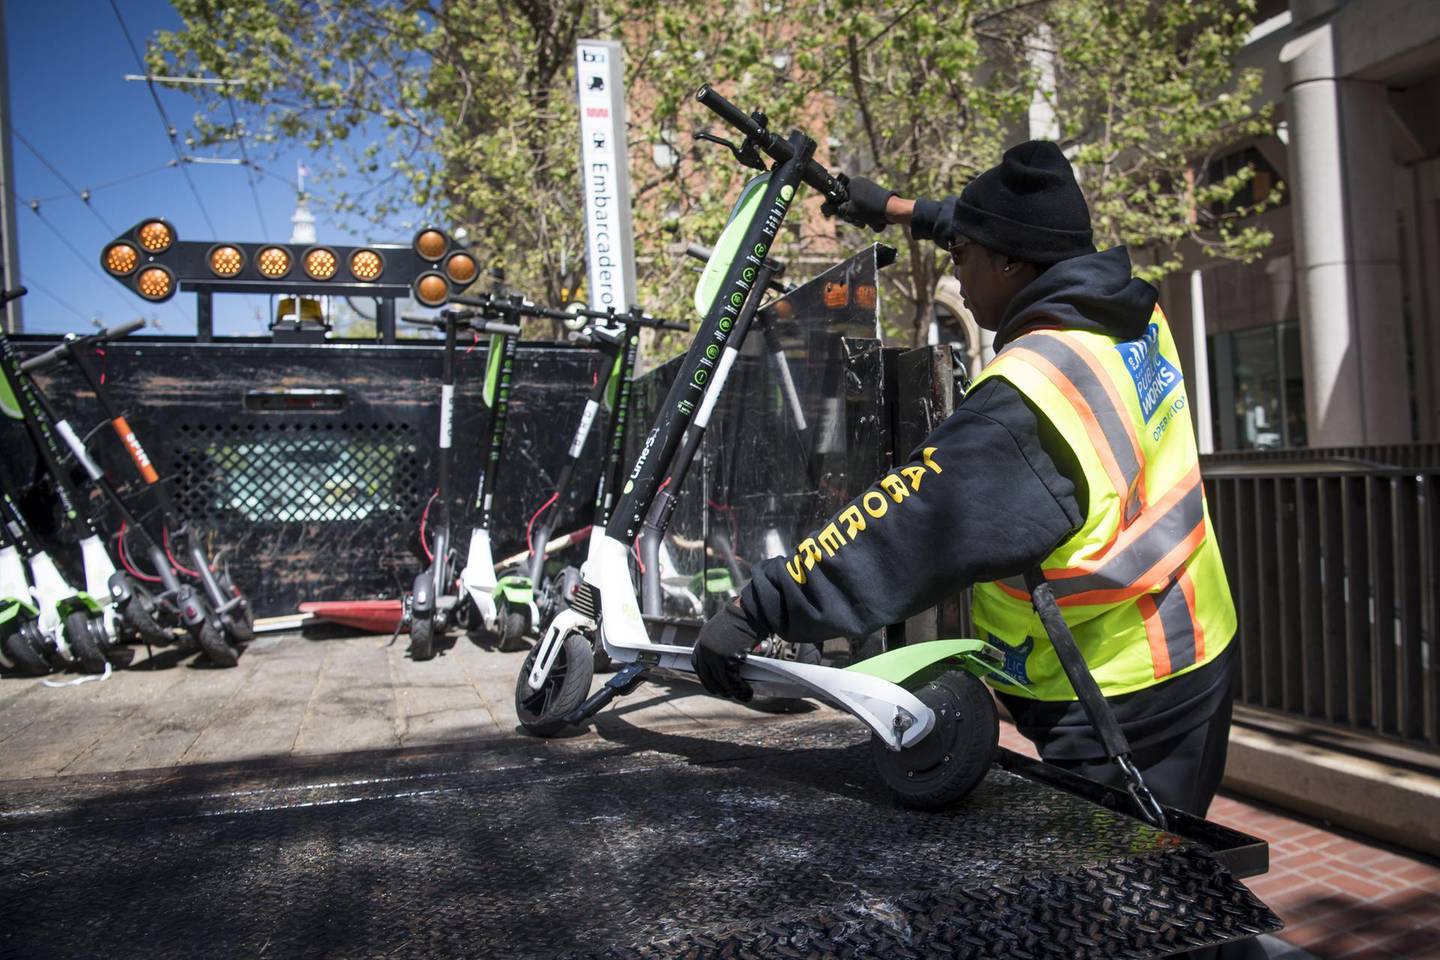 A City of San Francisco Public Works employee loads a Neutron Holdings Inc. LimeBike shared electric scooter onto the back of a truck in San Francisco, California, U.S., on Wednesday, May 2, 2018. City officials, eager to do something about the electric scooters issue, are sending cease-and-desist letters and are planning to require permits soon, while impounding any that they say are parked illegally. Photographer: David Paul Morris/Bloomberg